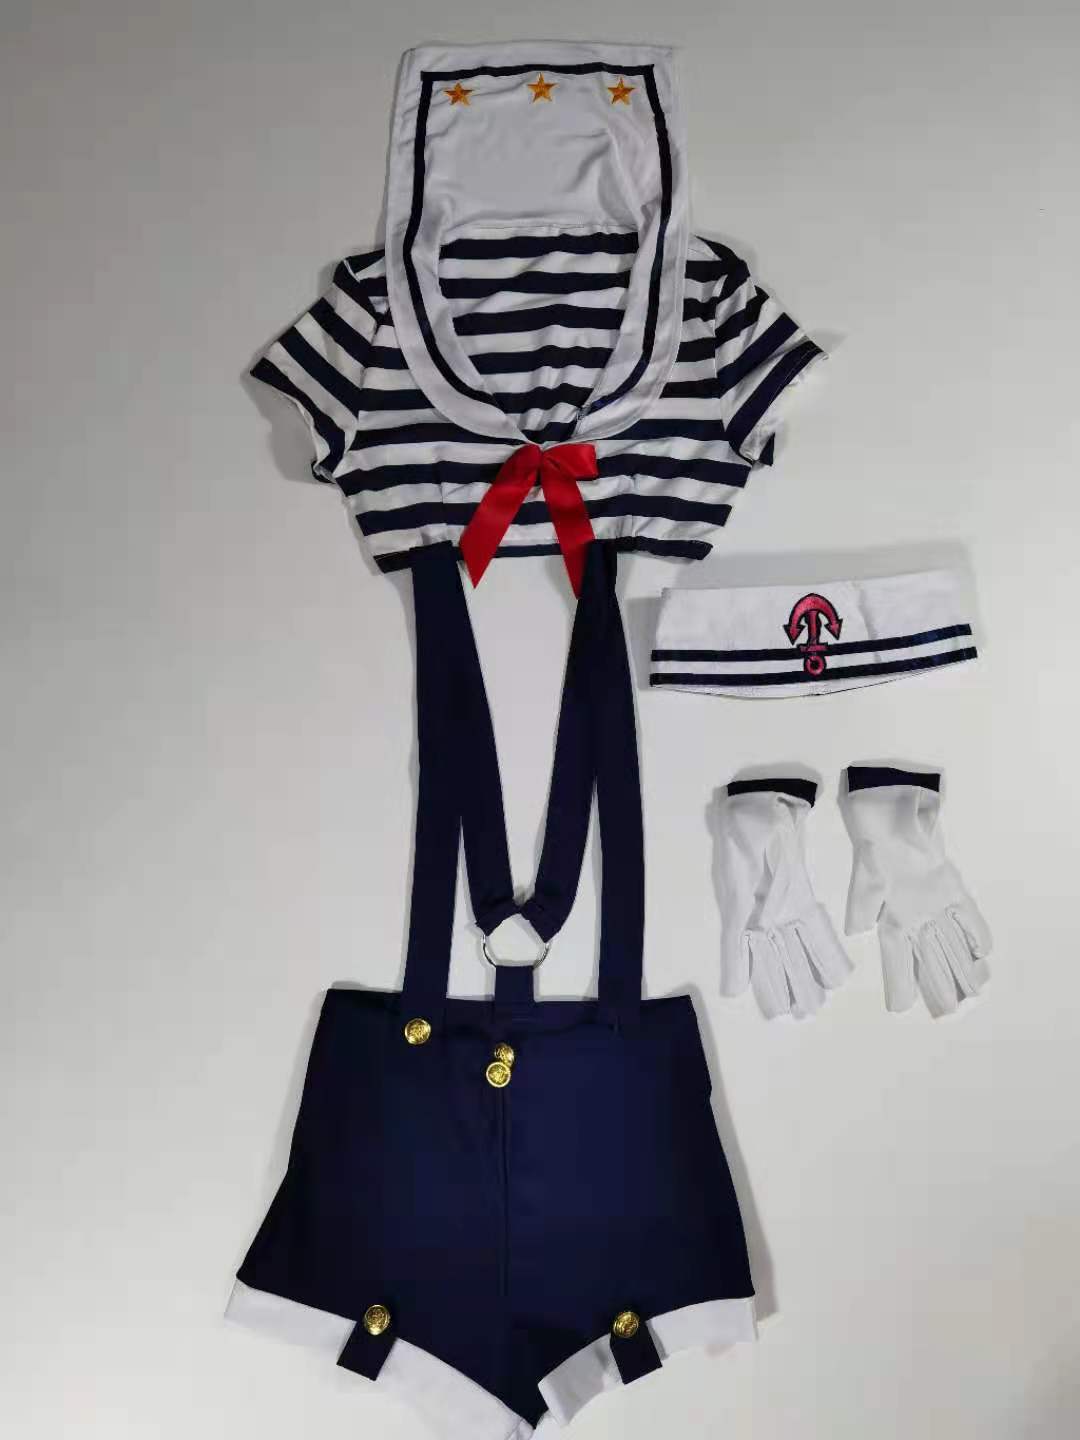 Sexy Striped Navy Costume Set Adult Women Halloween Cosplay Sailor Uniform Outfit Stage Performance Clothing